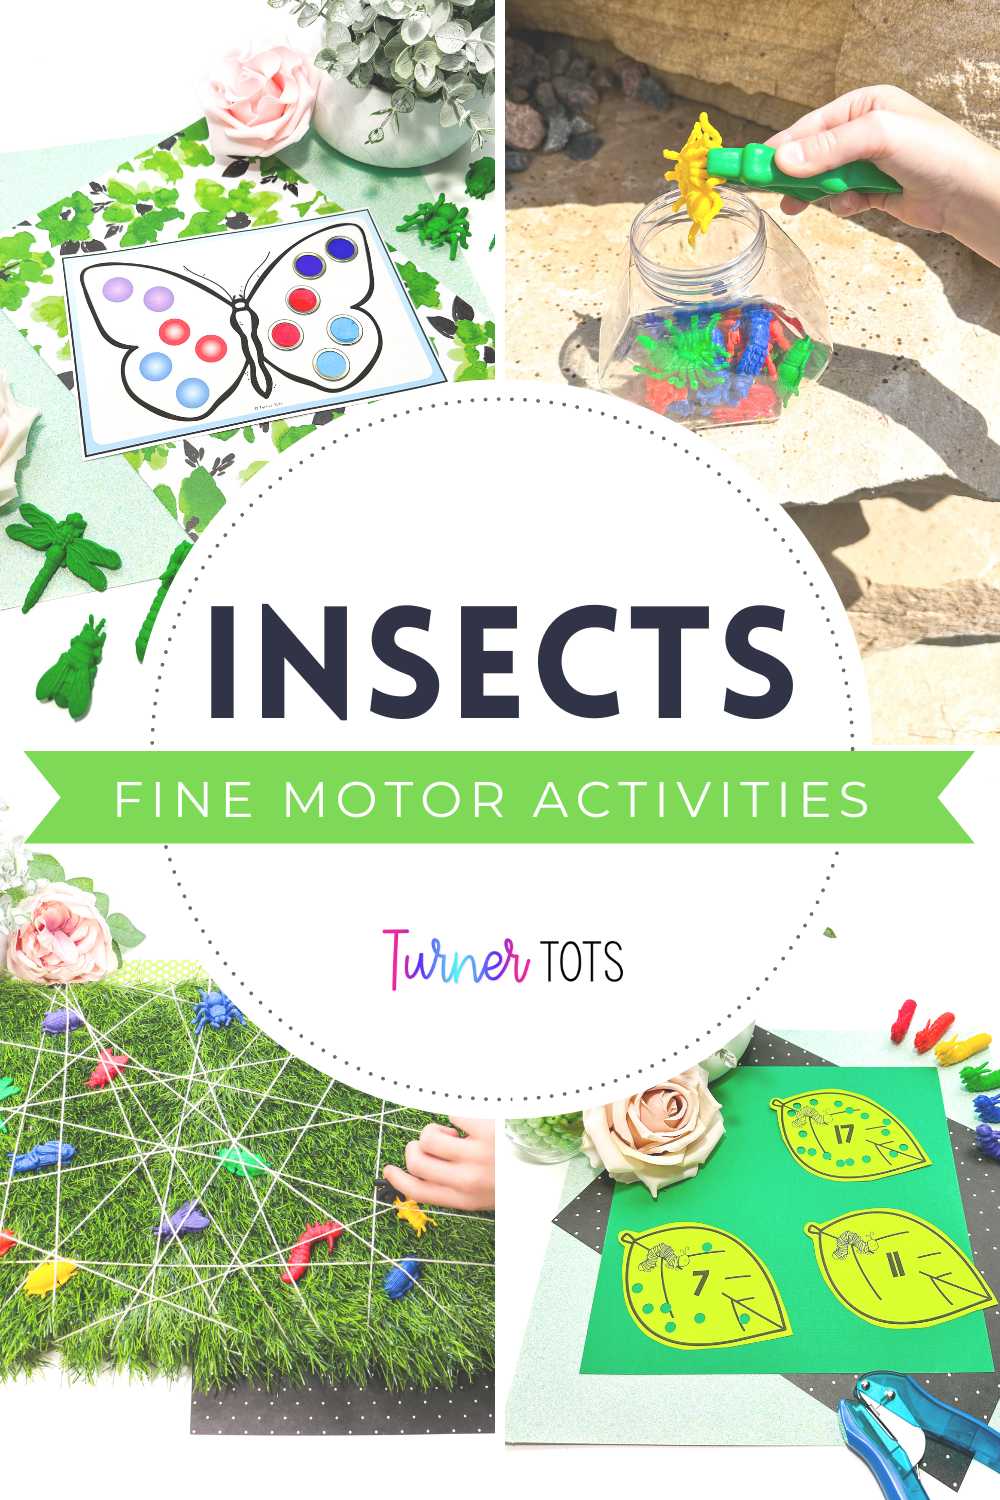 Insect fine motor activities include a butterfly symmetry activity using transparent chips, an outdoor bug hunt, a bug rescue using tweezers, and a leaf hole punch activity.